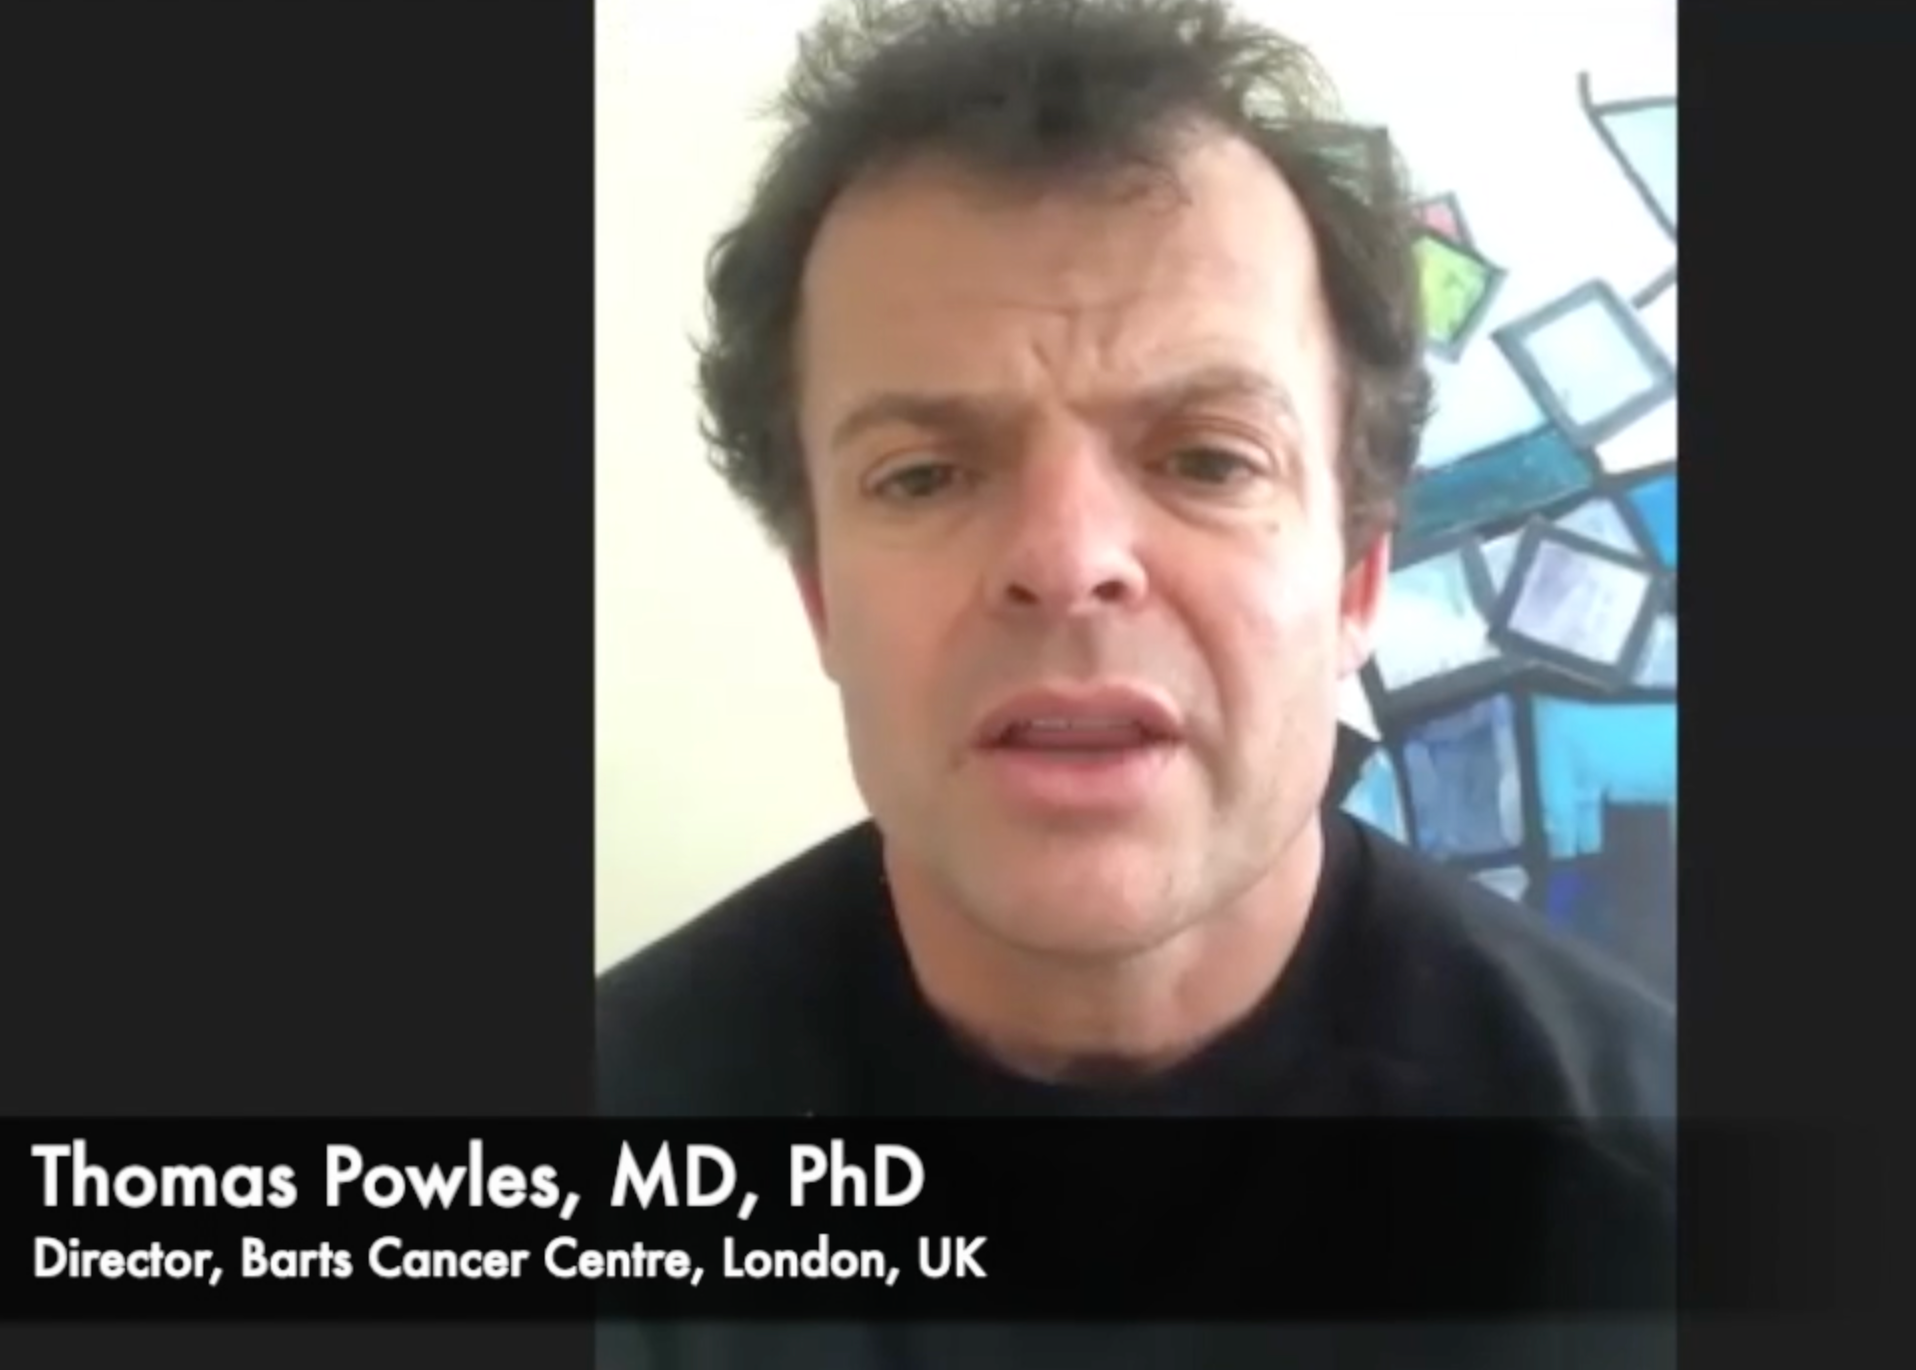 Thomas Powles, MD, PhD on Next Steps for Avelumab and the Future of Treatment for Urothelial Cancer